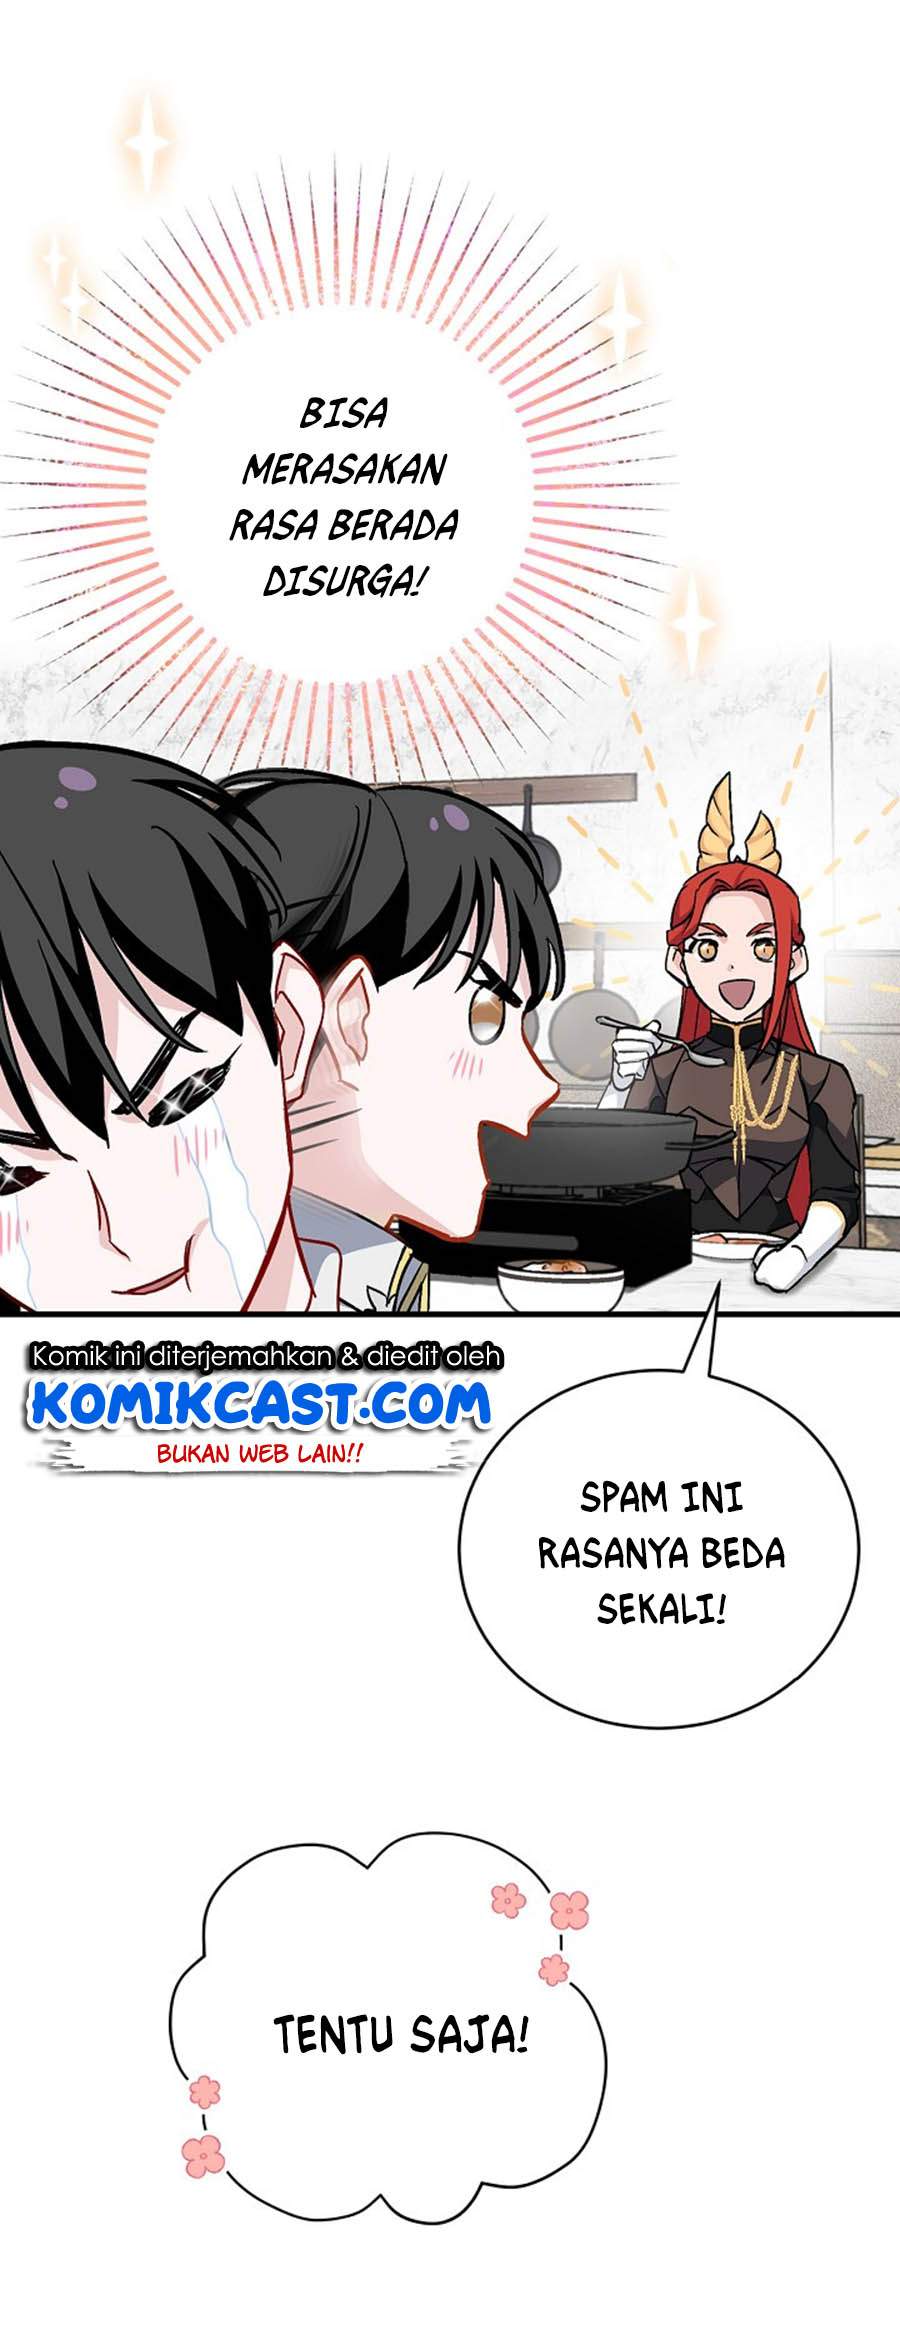 Leveling Up, By Only Eating! (Gourmet Gaming) Chapter 31 - 593